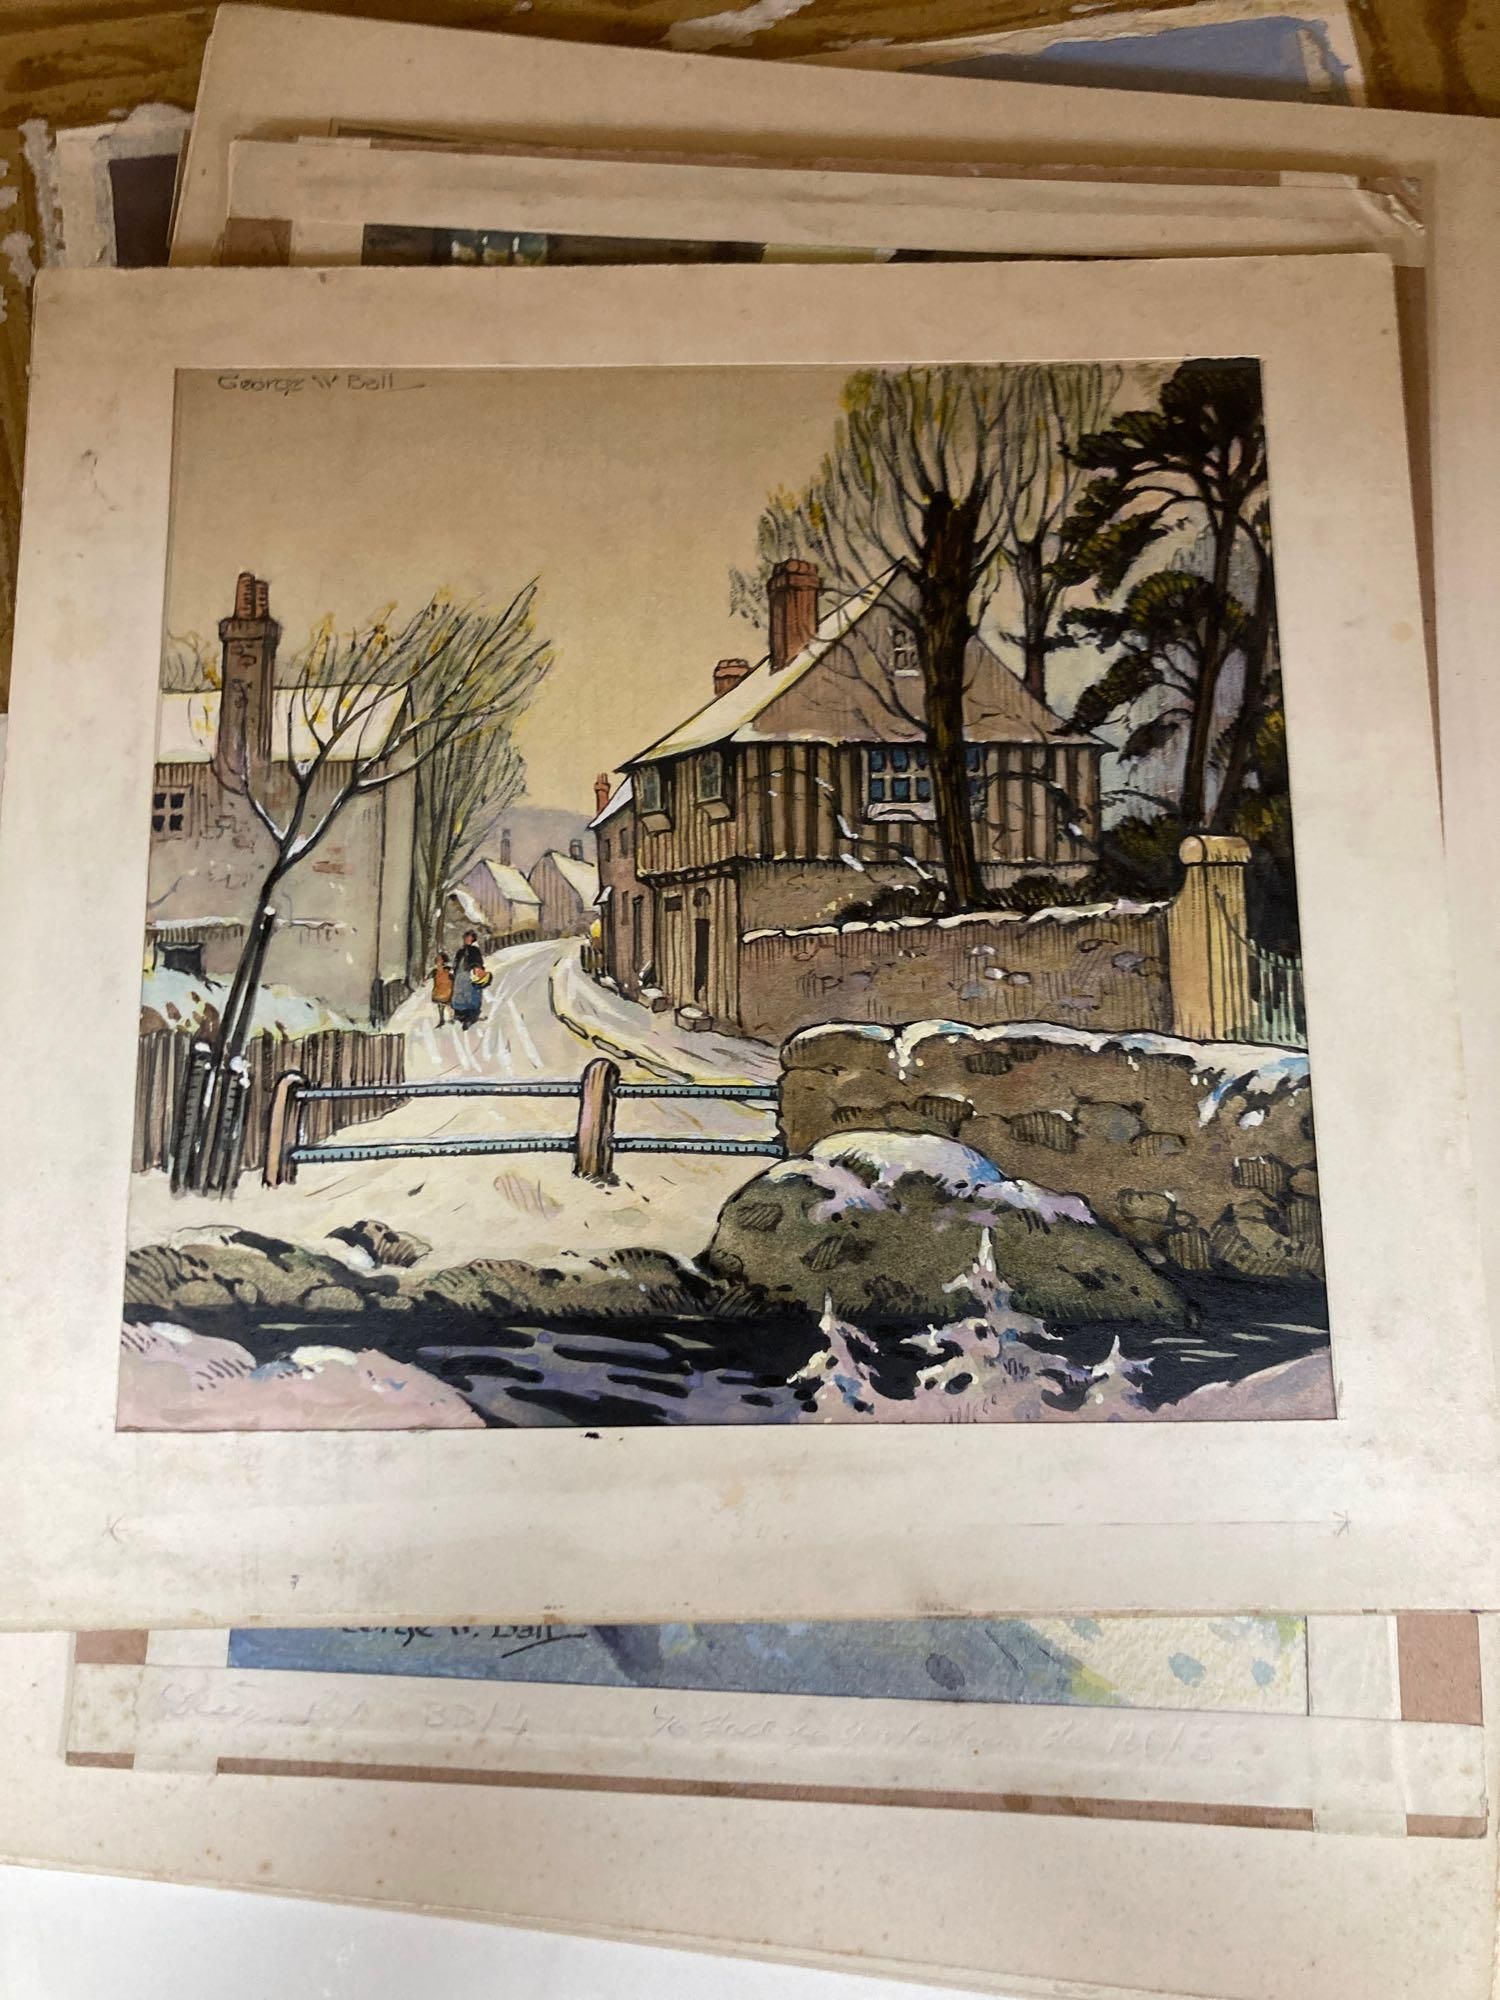 George W. Ball (20th century), a collection of 11 unframed watercolours and ink and watercolour drawings, 19 x 19.5cm to 38 x 23cm